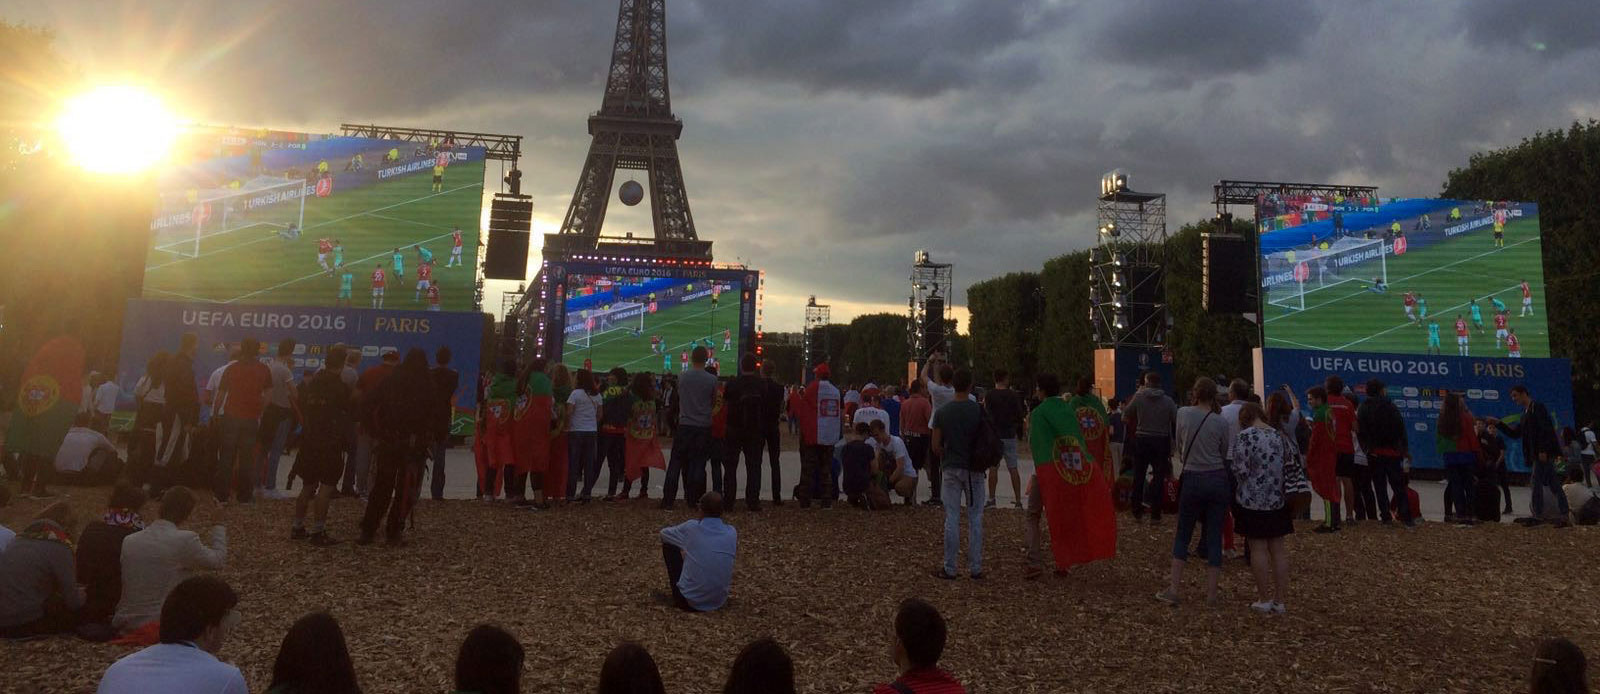 screens playing soccer match in front of Eiffel Tower